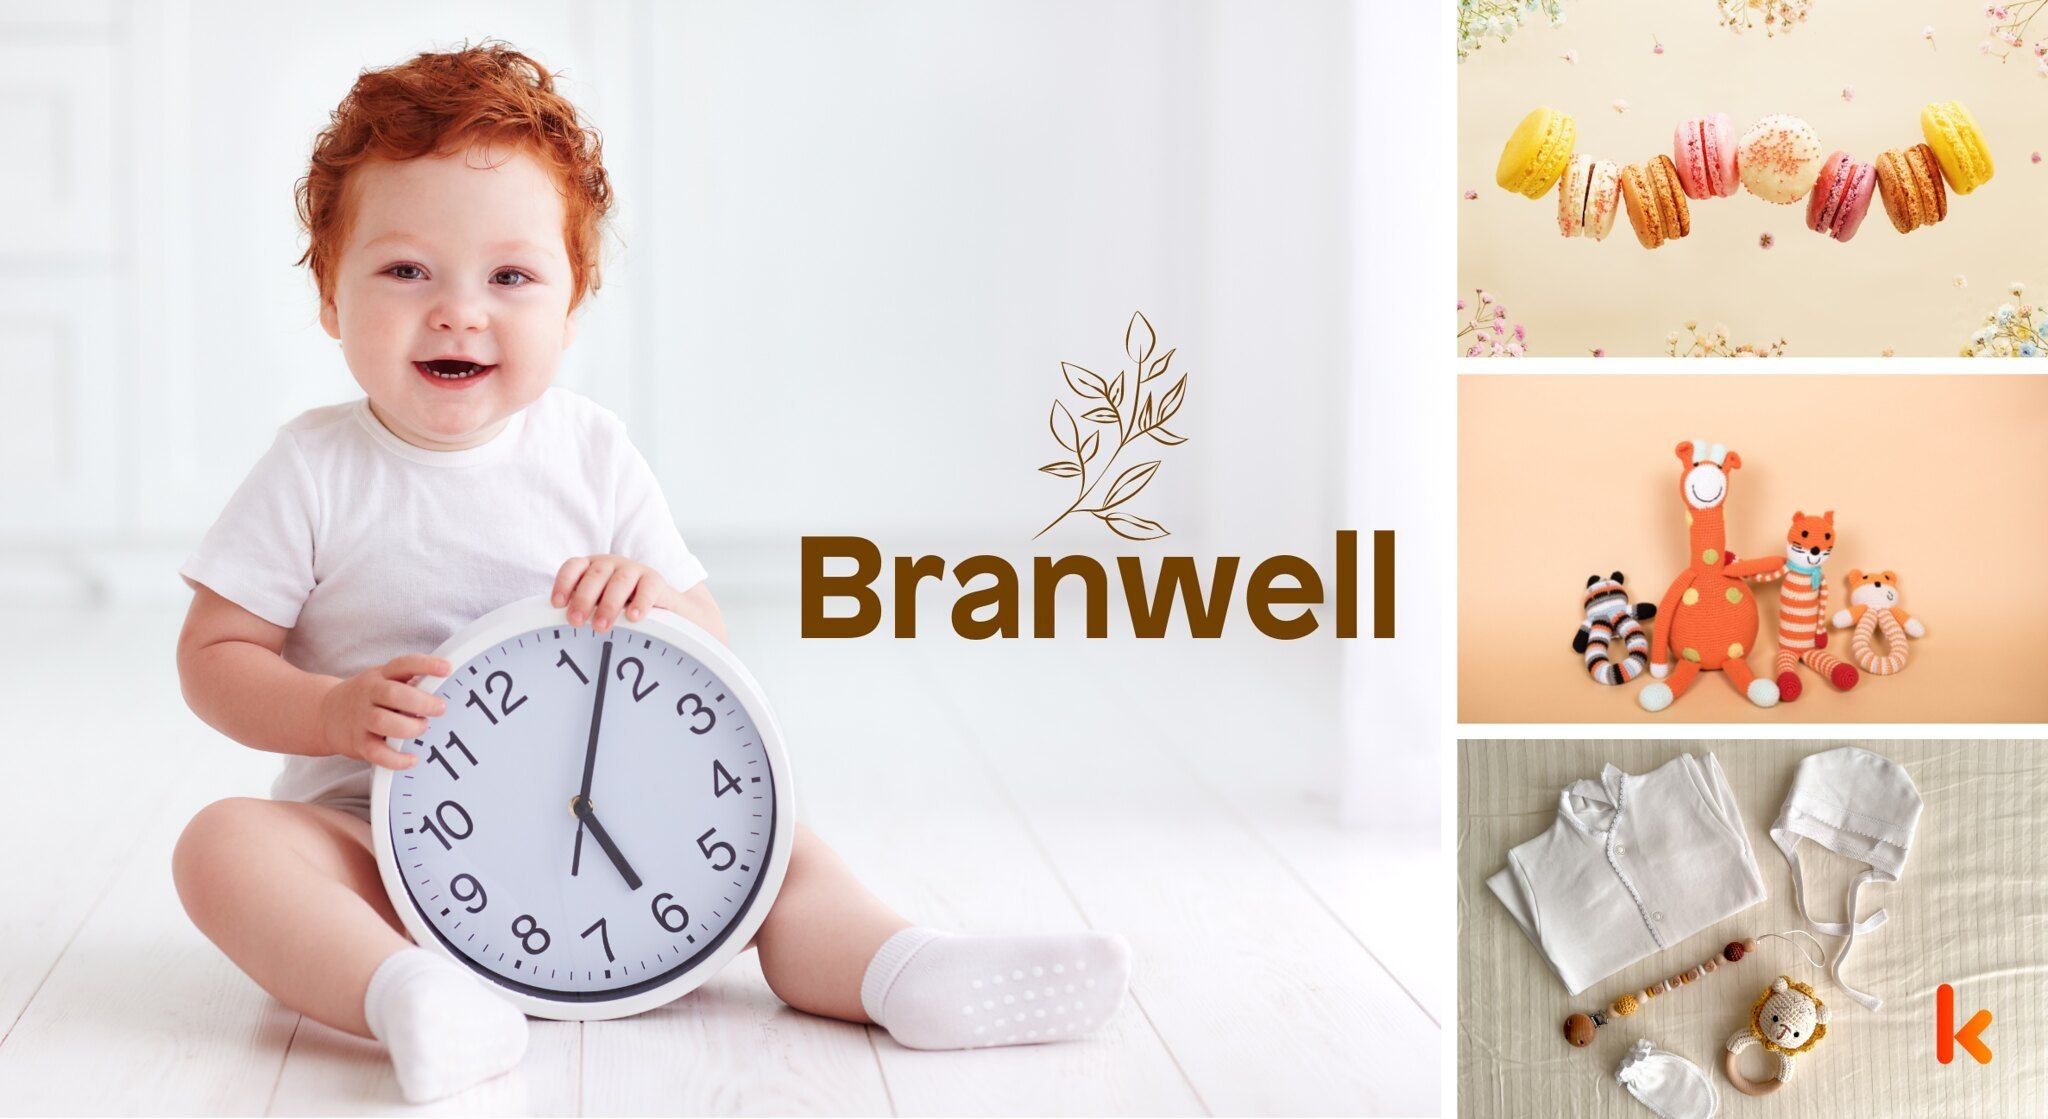 Meaning of the name Branwell